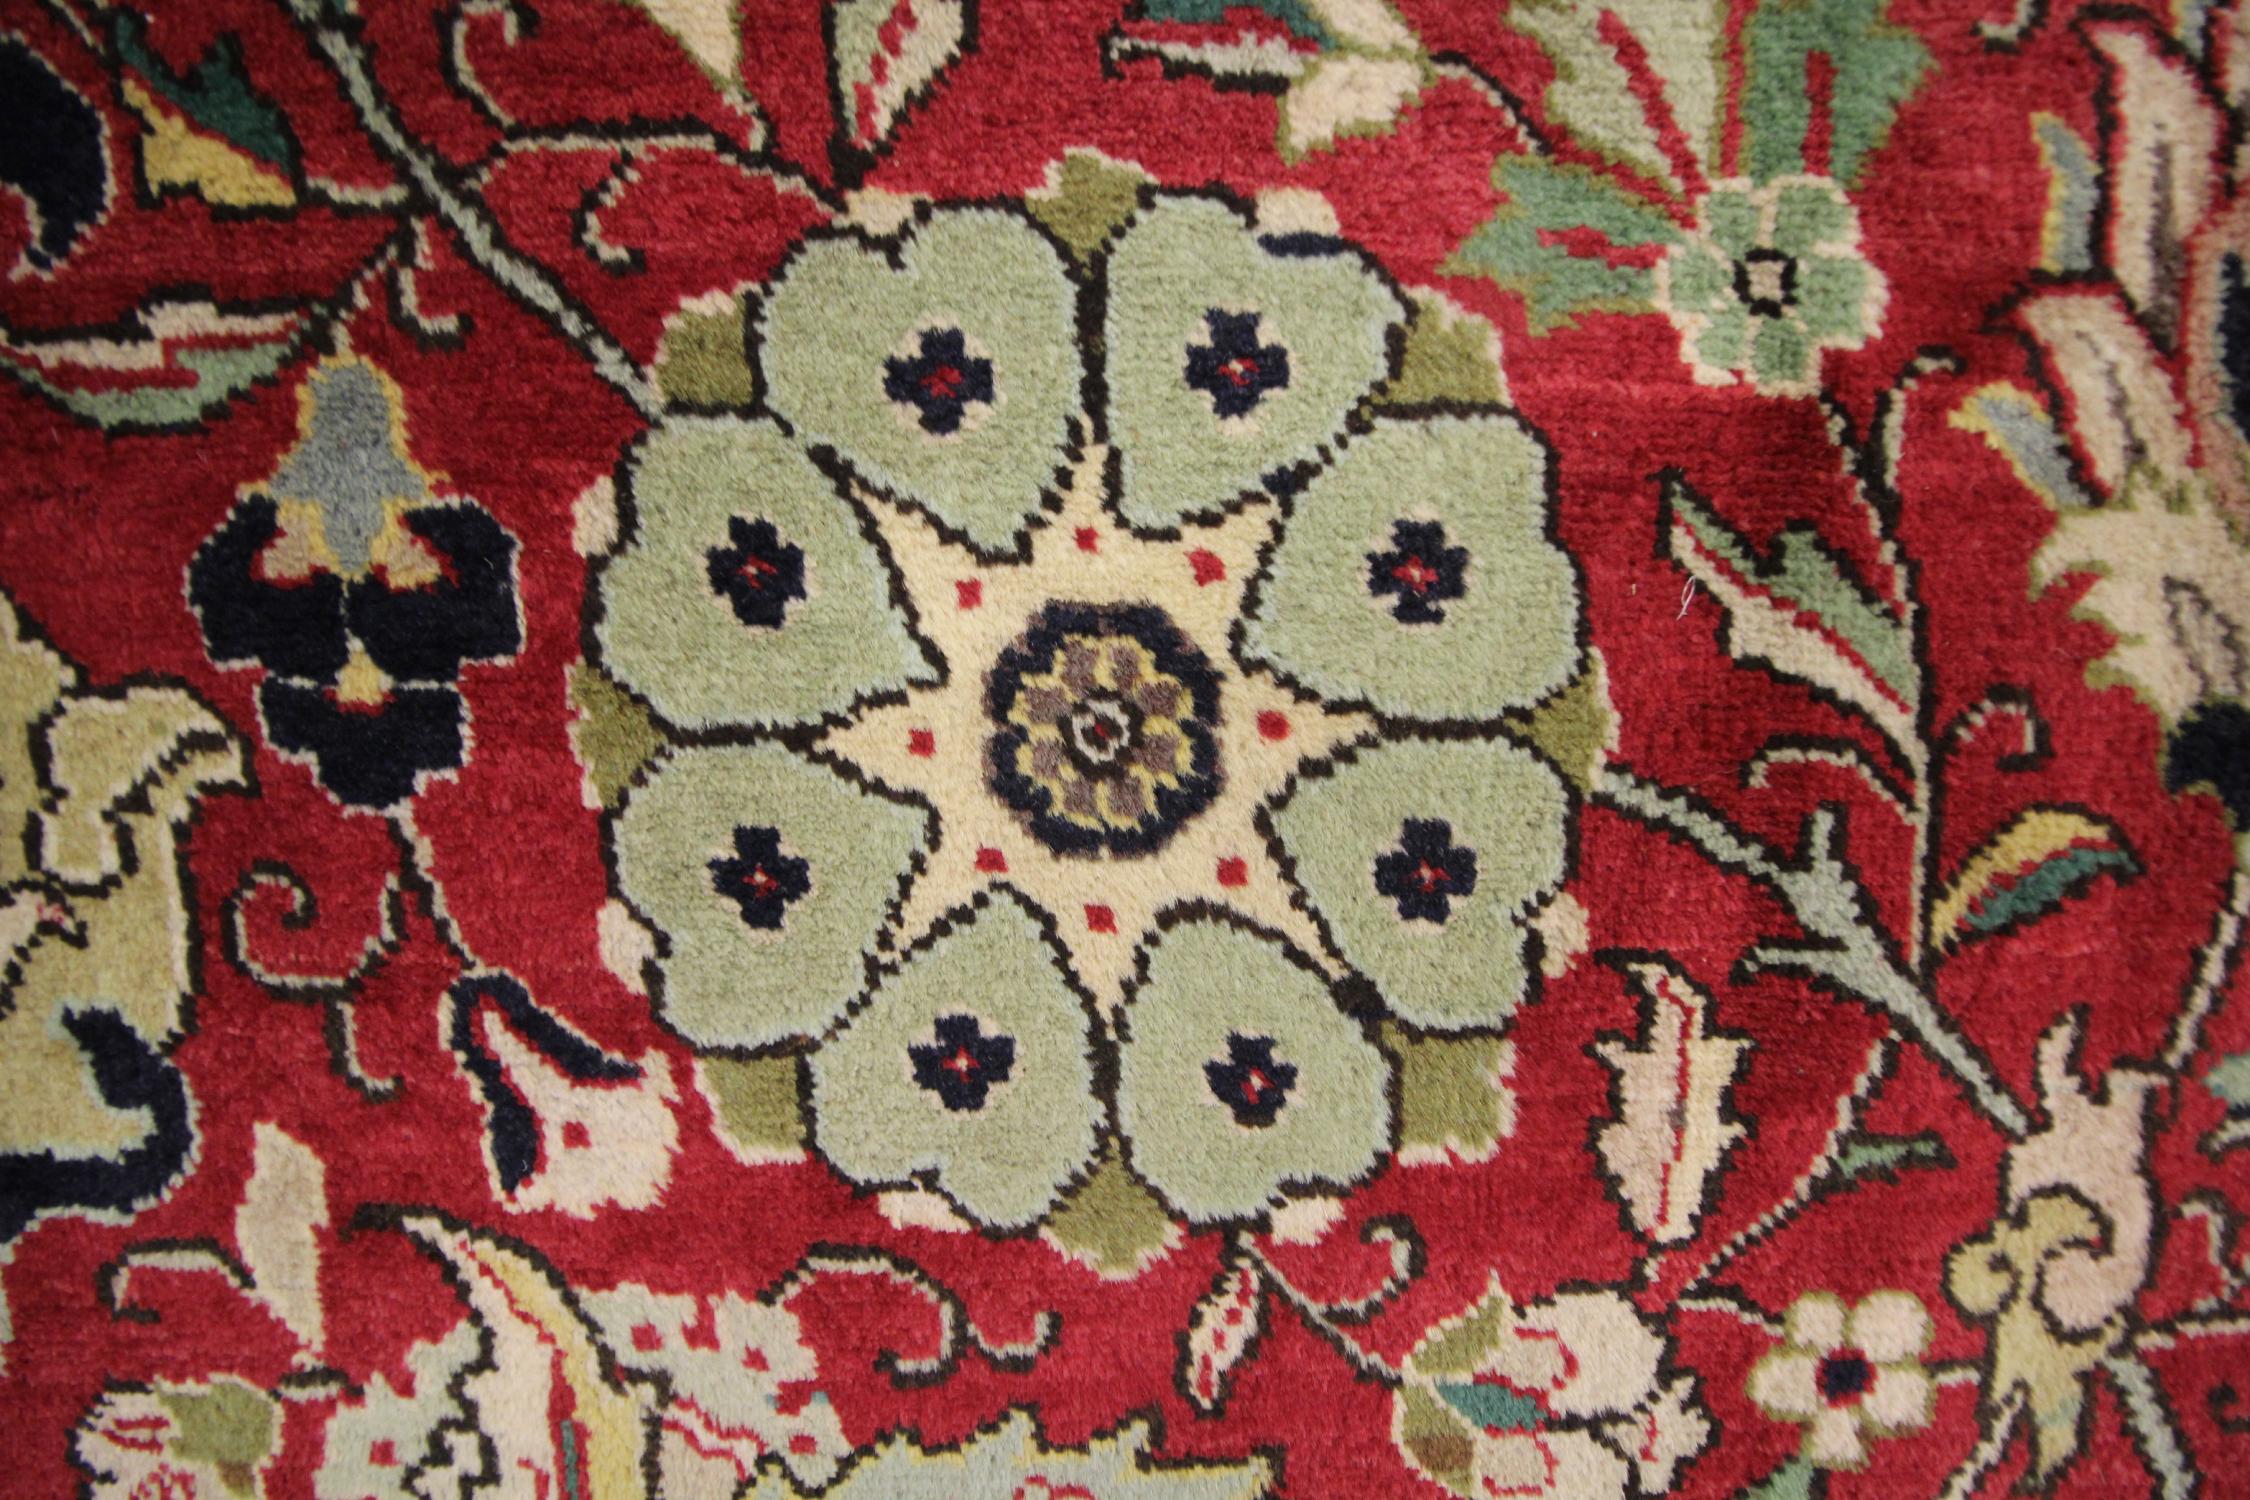 Woven Large Vintage Rugs, Red All Over Carpet, Wool Living Room Rugs for Sale For Sale